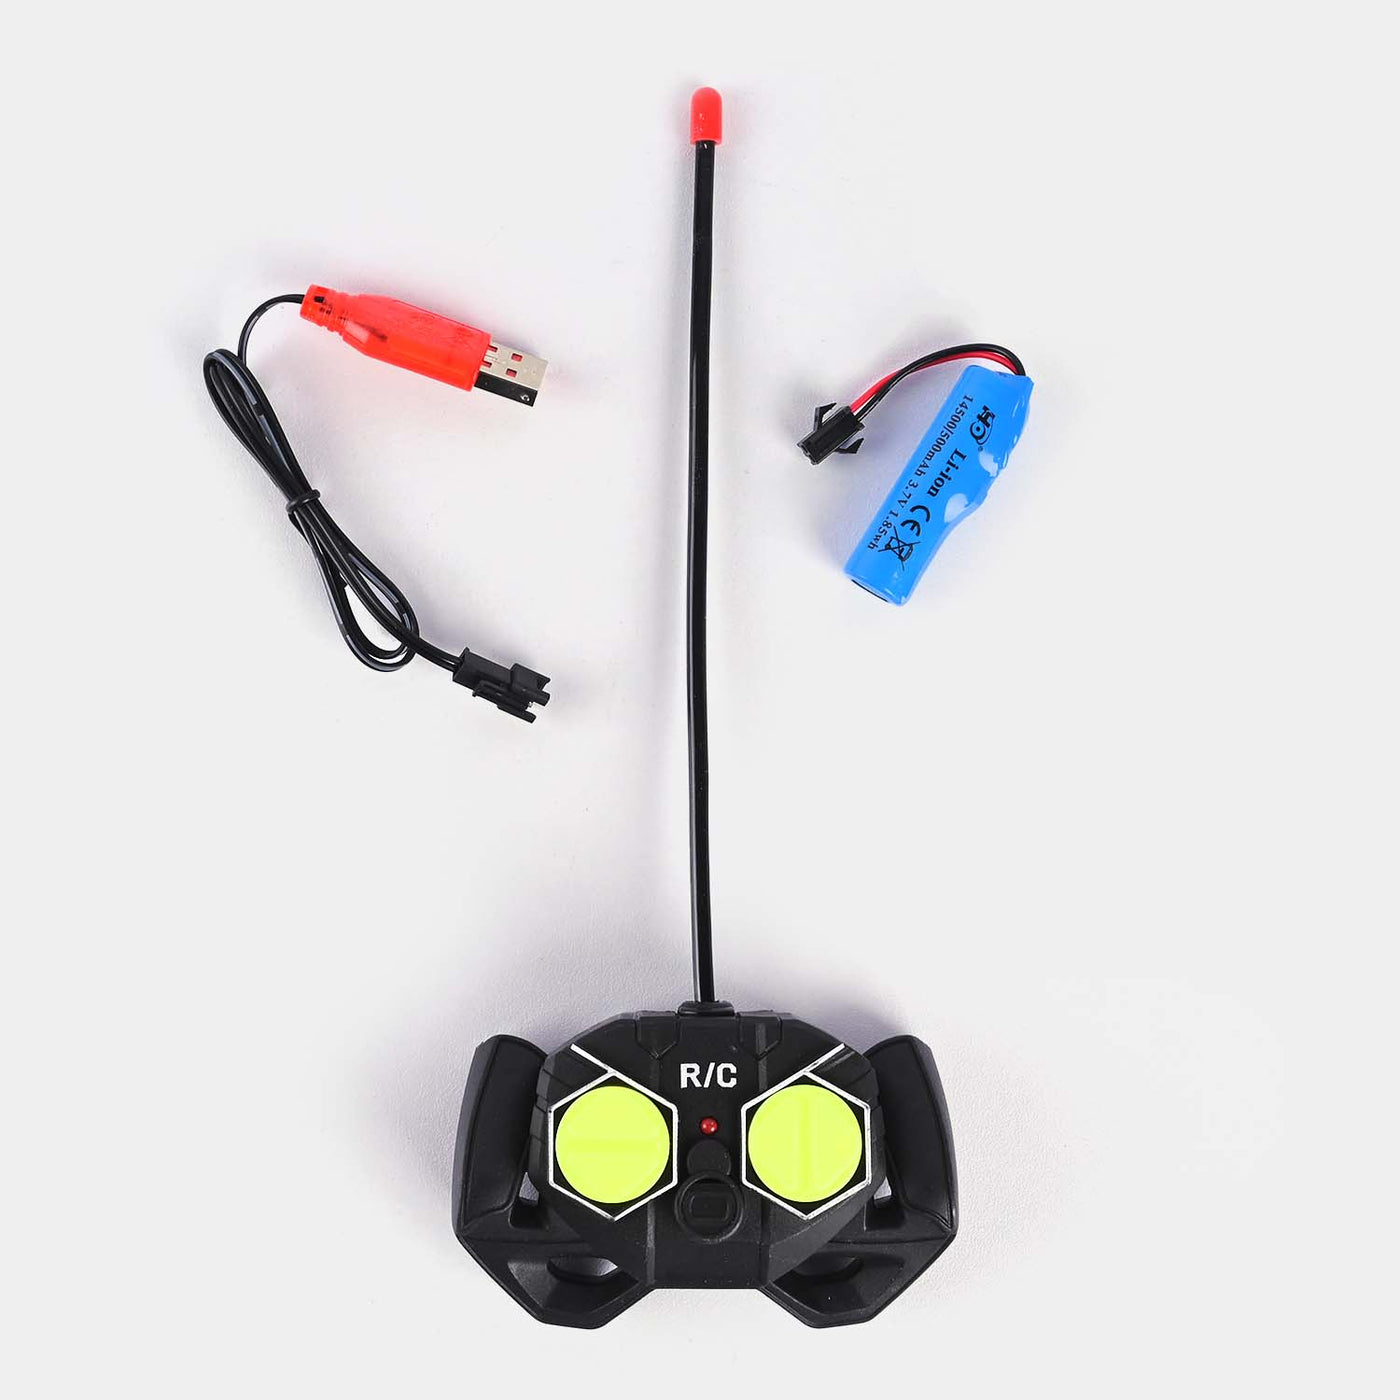 REMOTE CONTROL CAR FOR KIDS